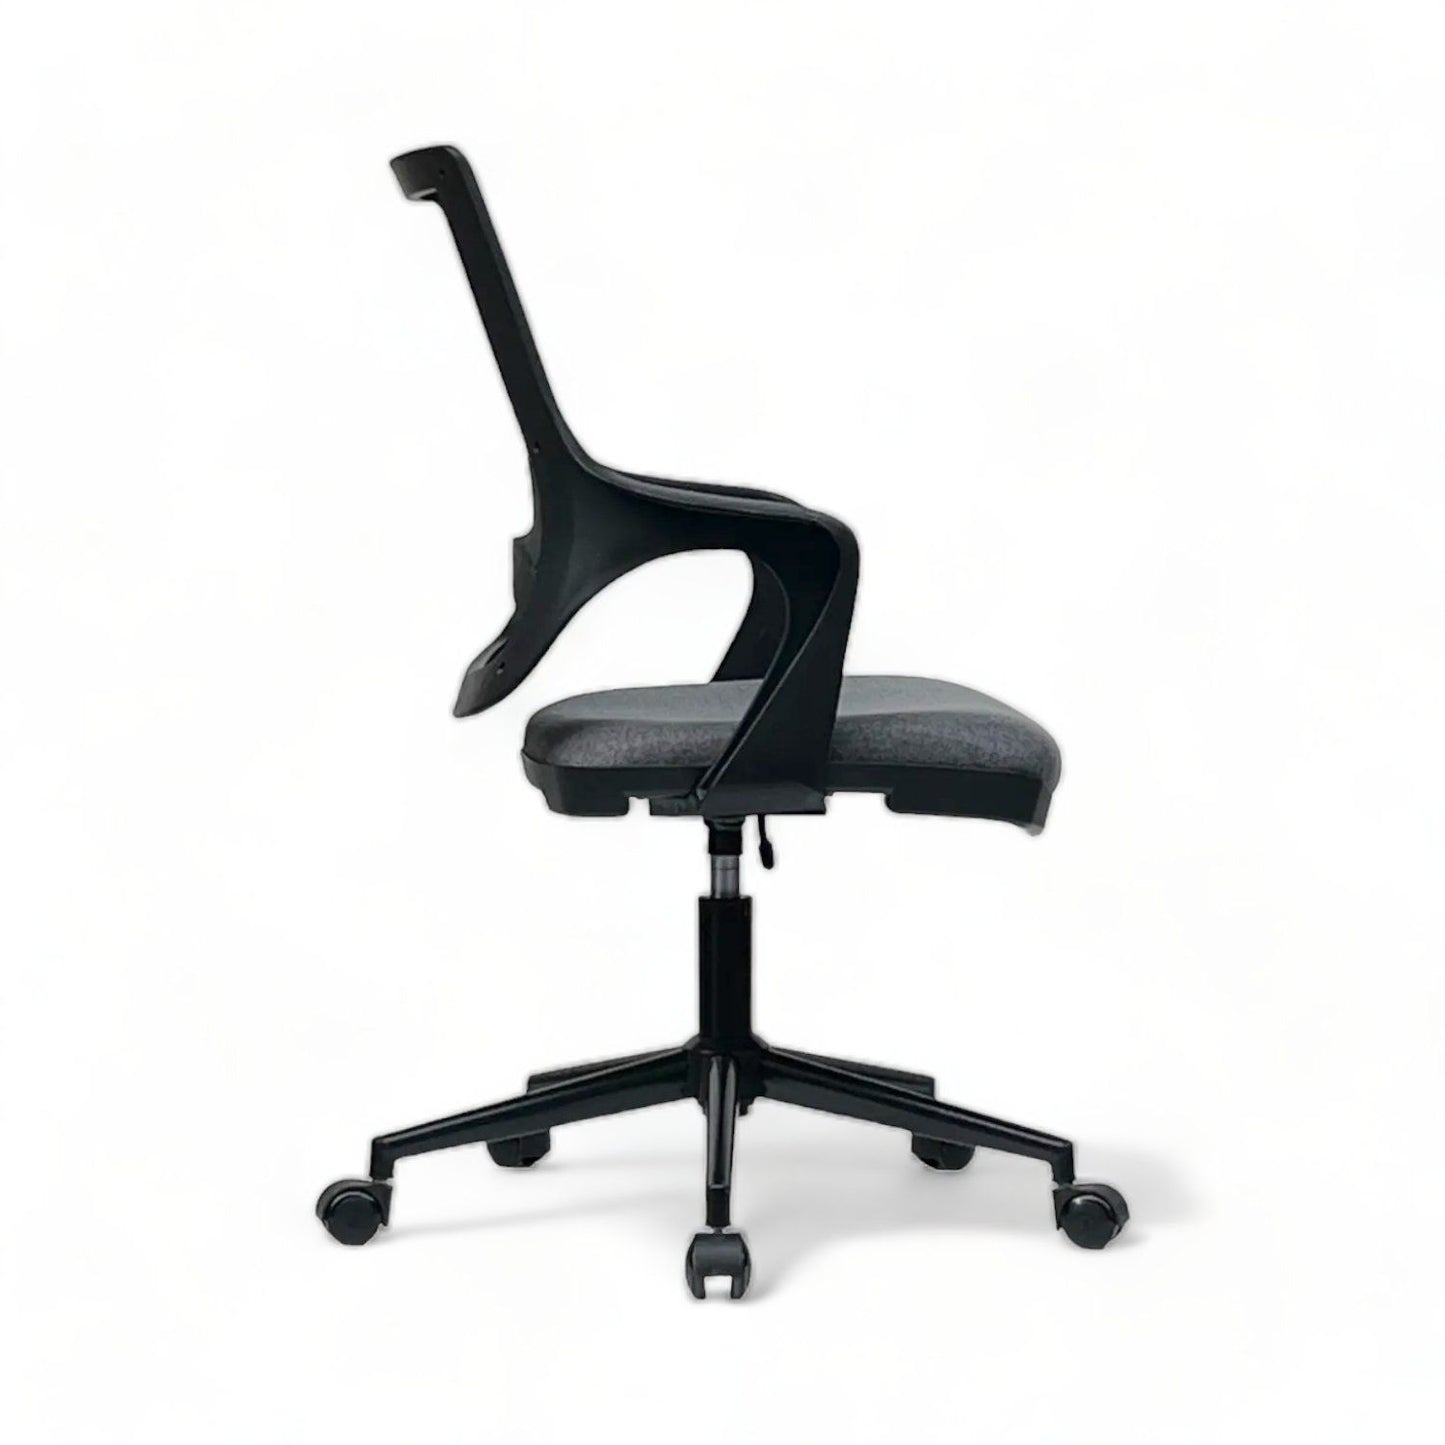 Mango - Anthracite - Office Chair